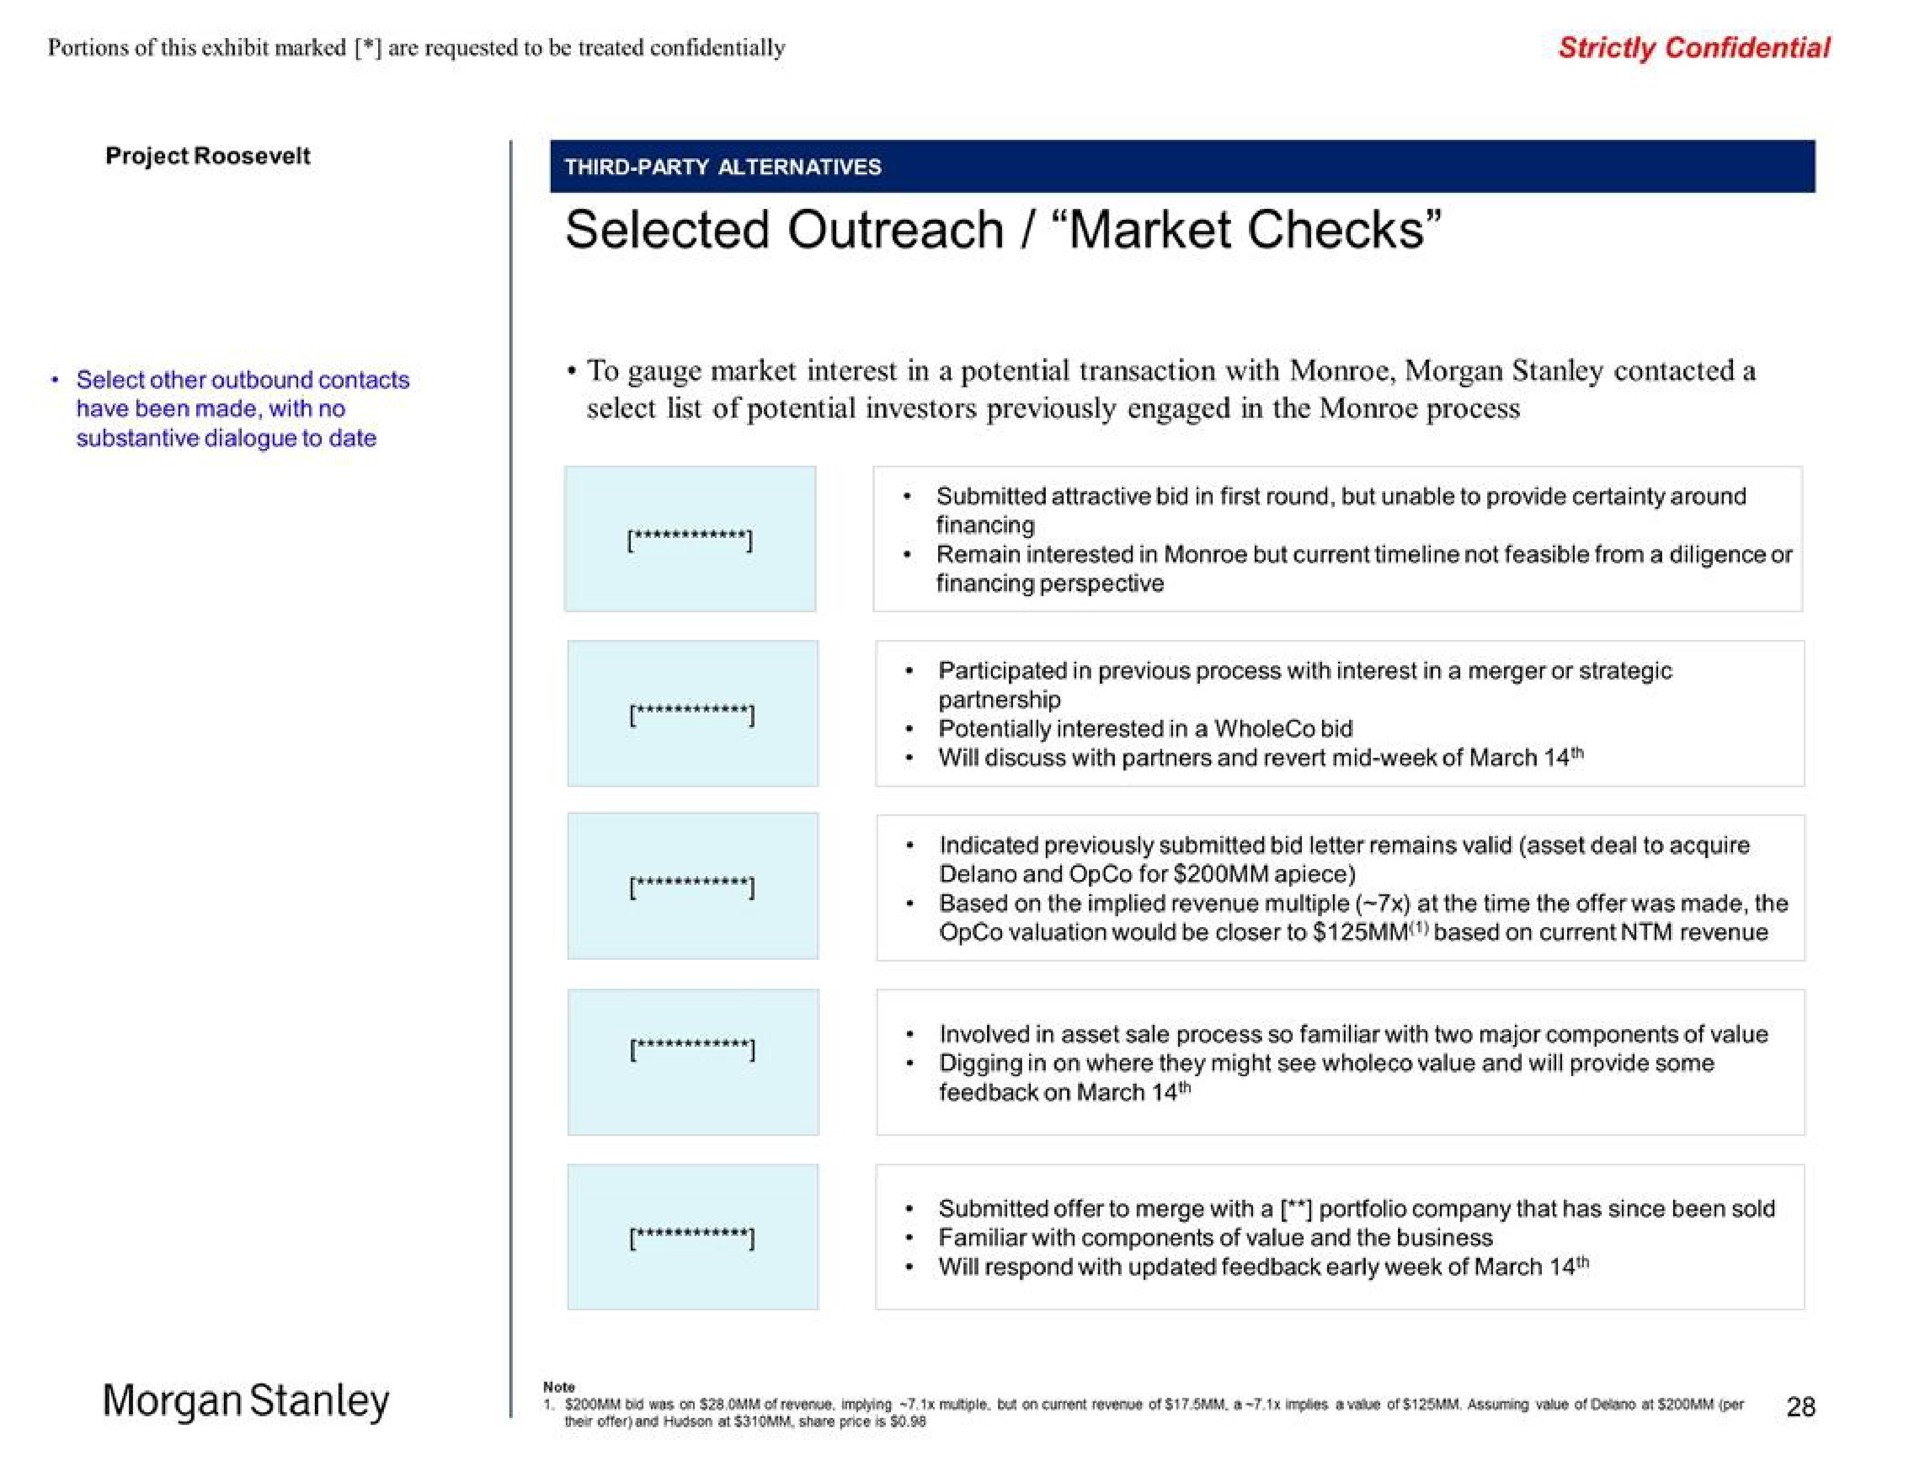 selected outreach market checks potentially interested in a bid | Morgan Stanley